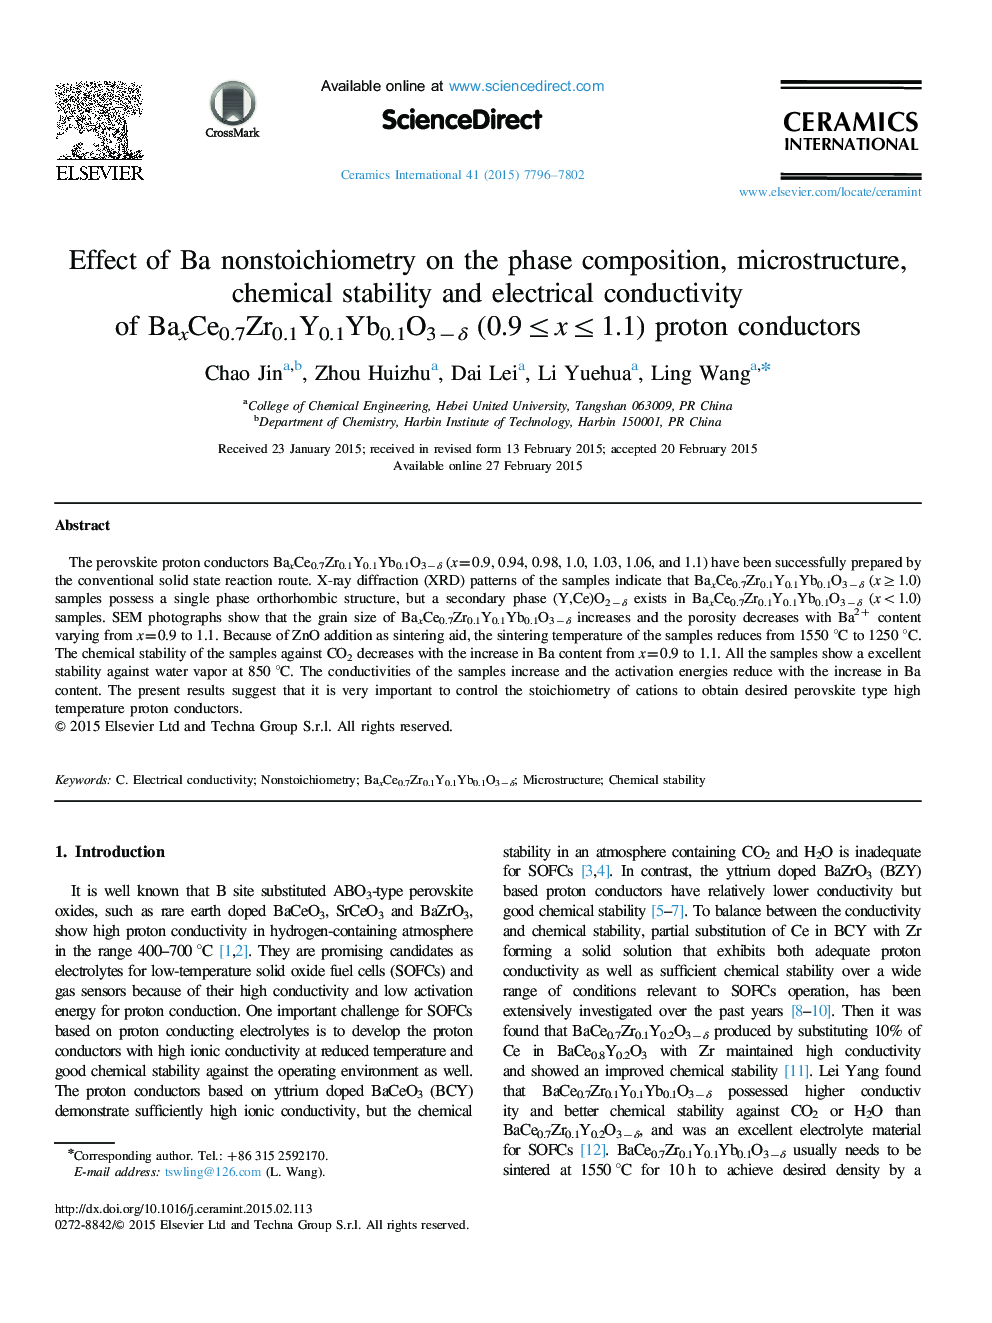 Effect of Ba nonstoichiometry on the phase composition, microstructure, chemical stability and electrical conductivity of BaxCe0.7Zr0.1Y0.1Yb0.1O3−δ (0.9≤x≤1.1) proton conductors